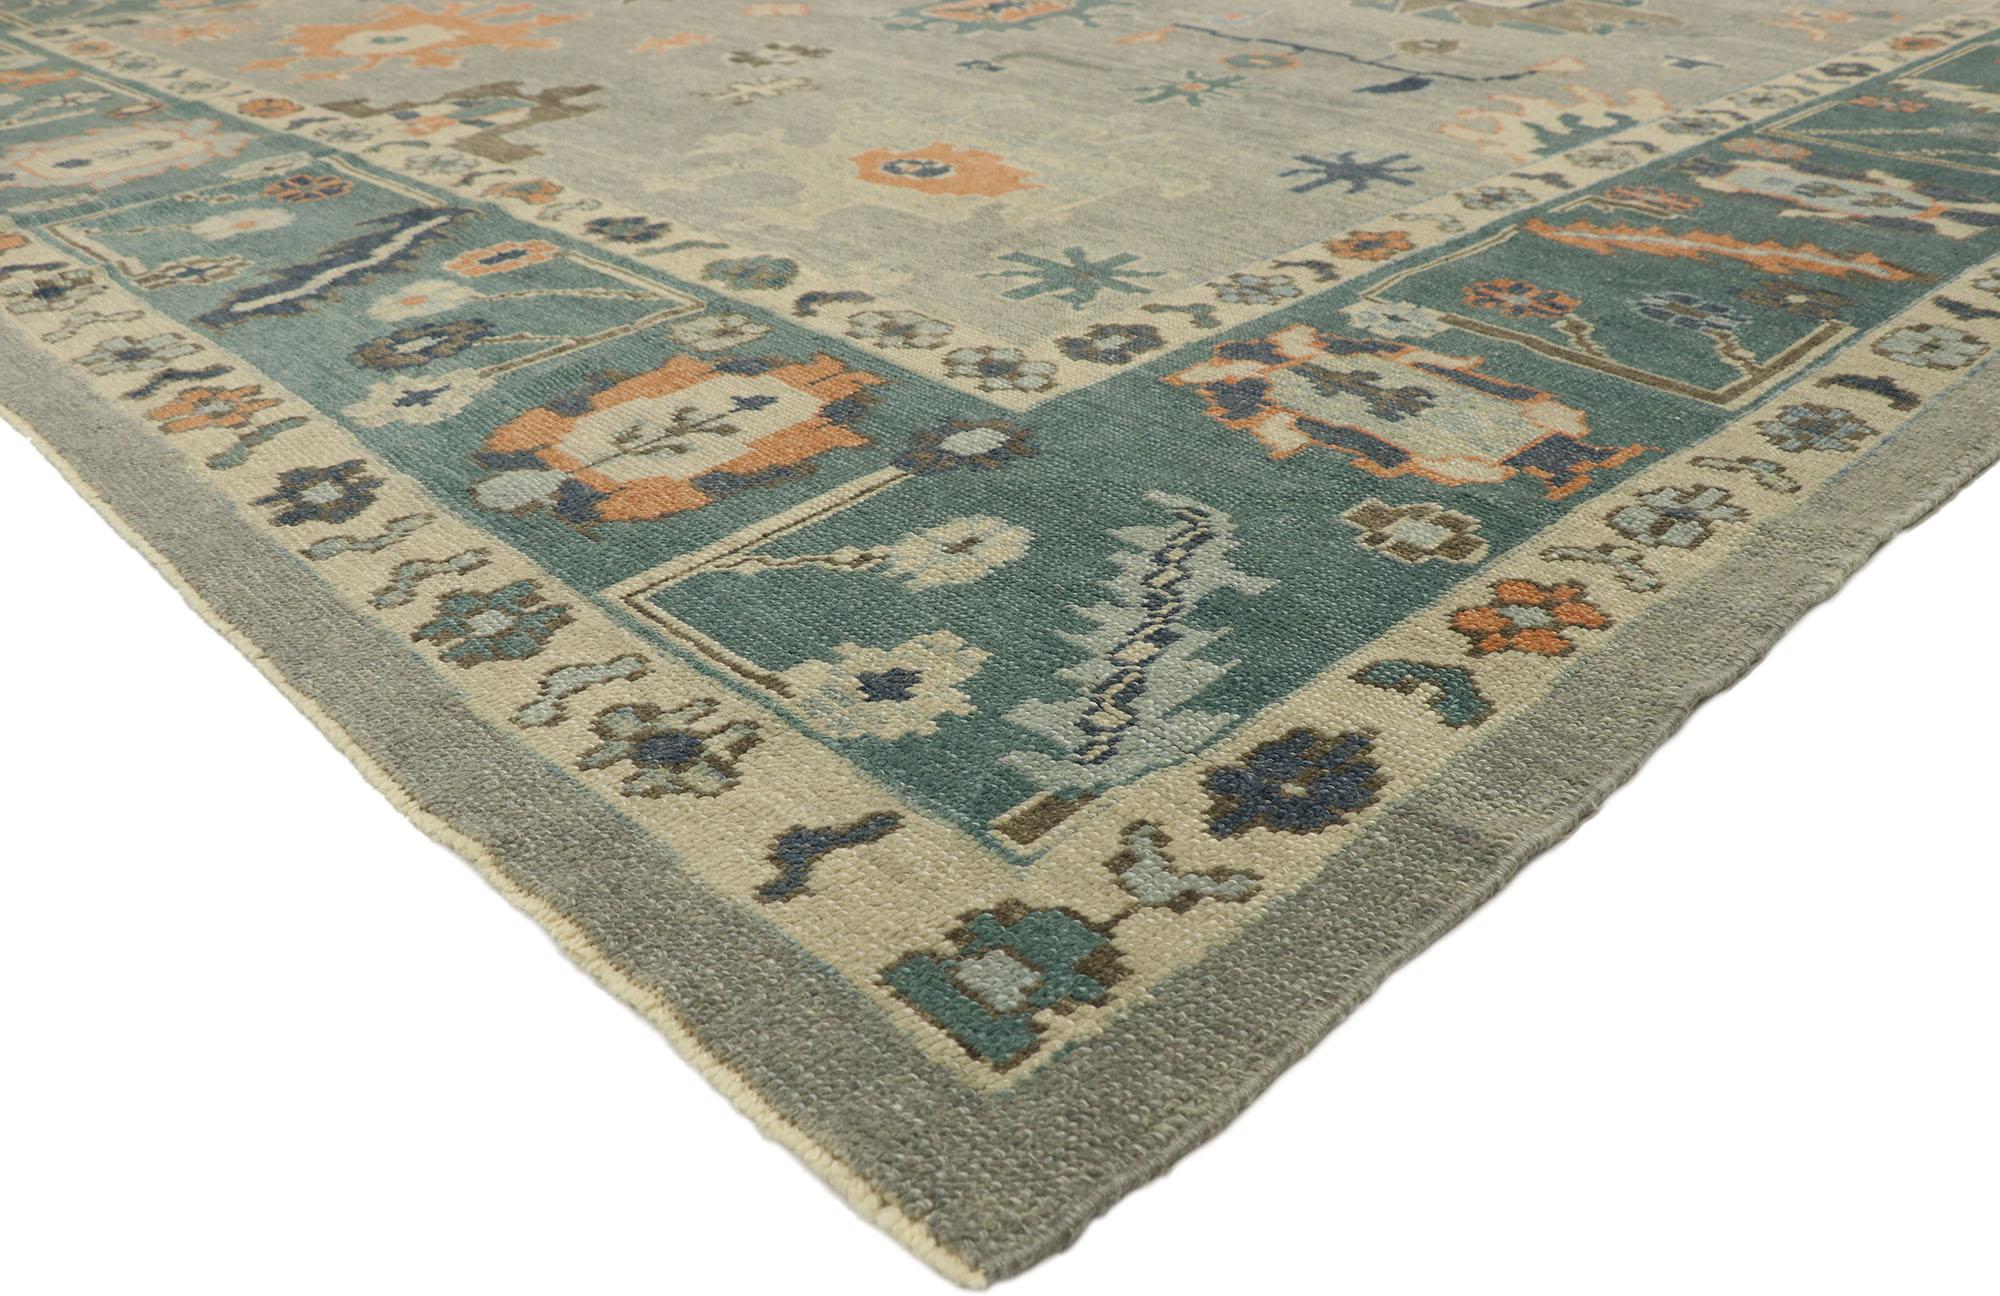 52812 New Contemporary Turkish Oushak rug with modern style. This hand knotted wool new contemporary Turkish Oushak rug features an all-over botanical pattern composed of Harshang-style motifs, palmettes, stylized florals, organic and amorphous